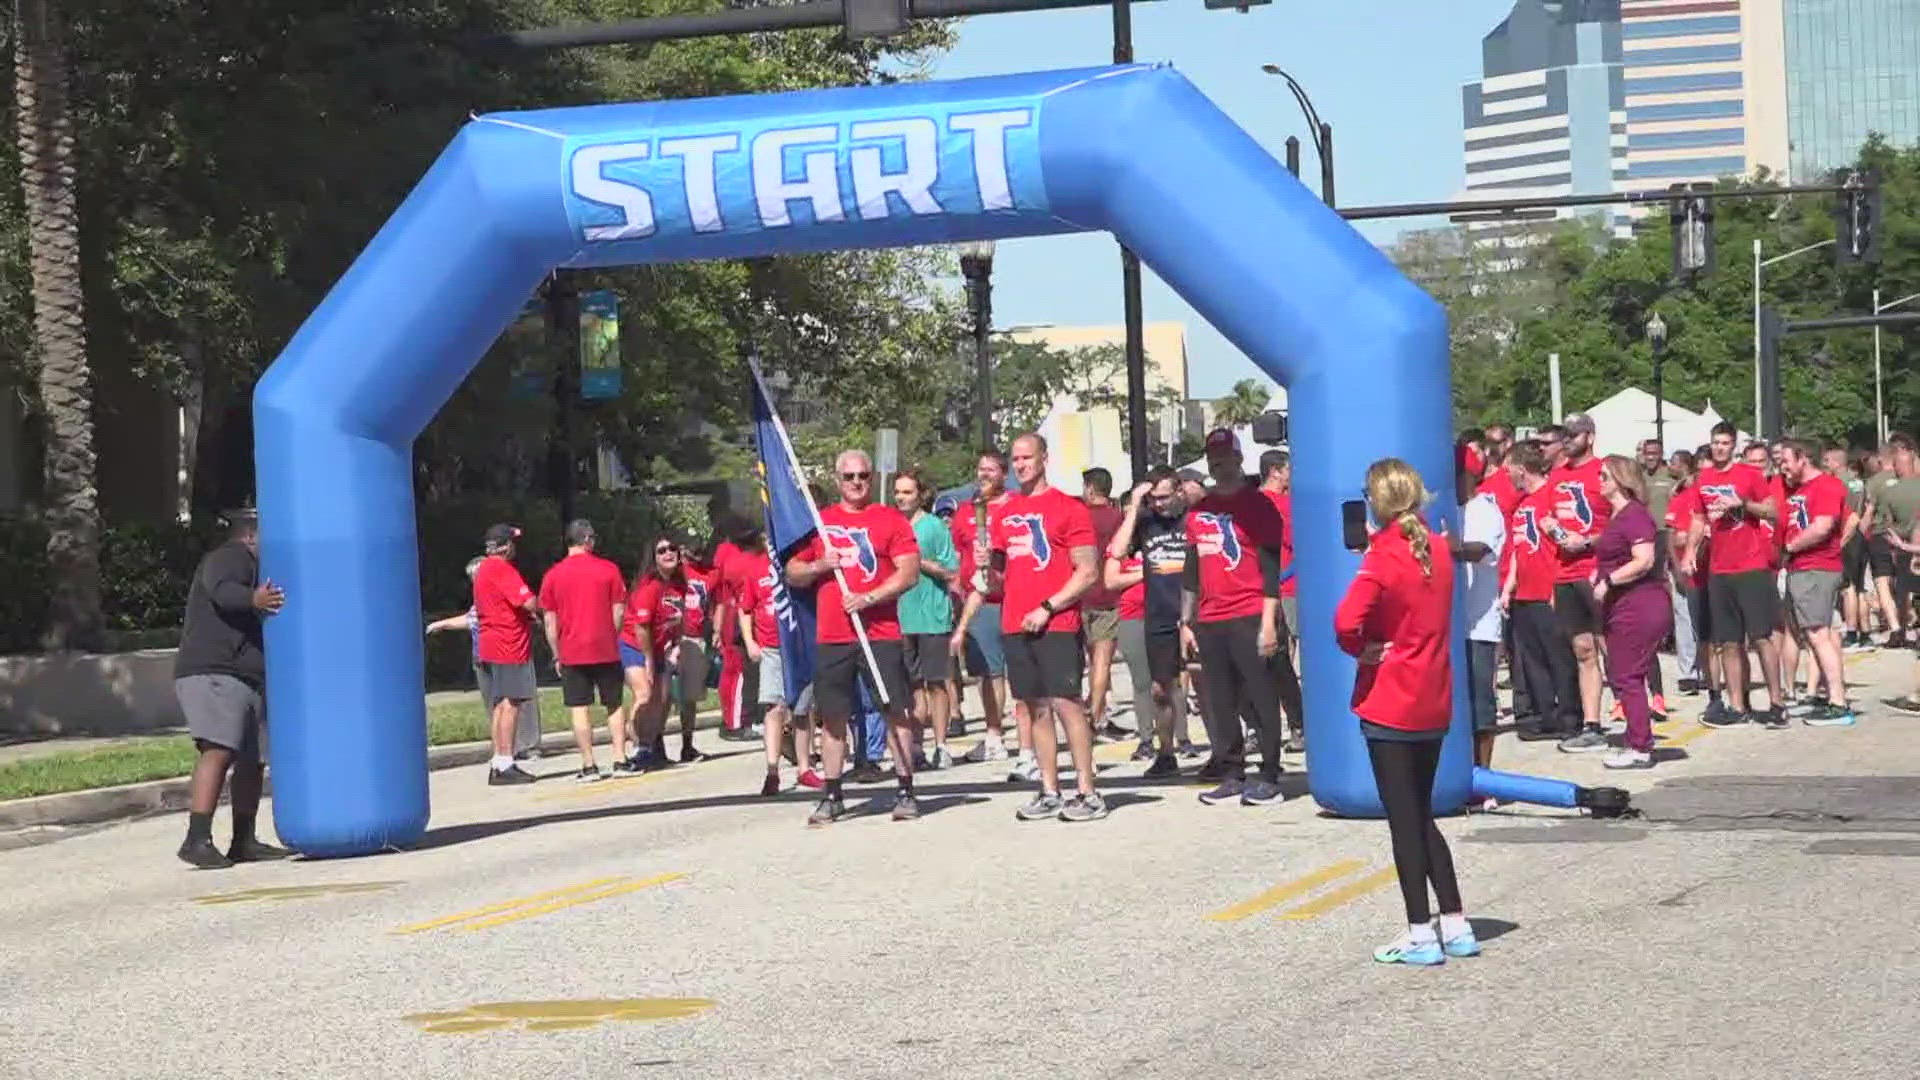 The Jacksonville Sheriff's Office held the event, with the starting line beginning in front of the Police Memorial Building in downtown Jacksonville Tuesday morning.